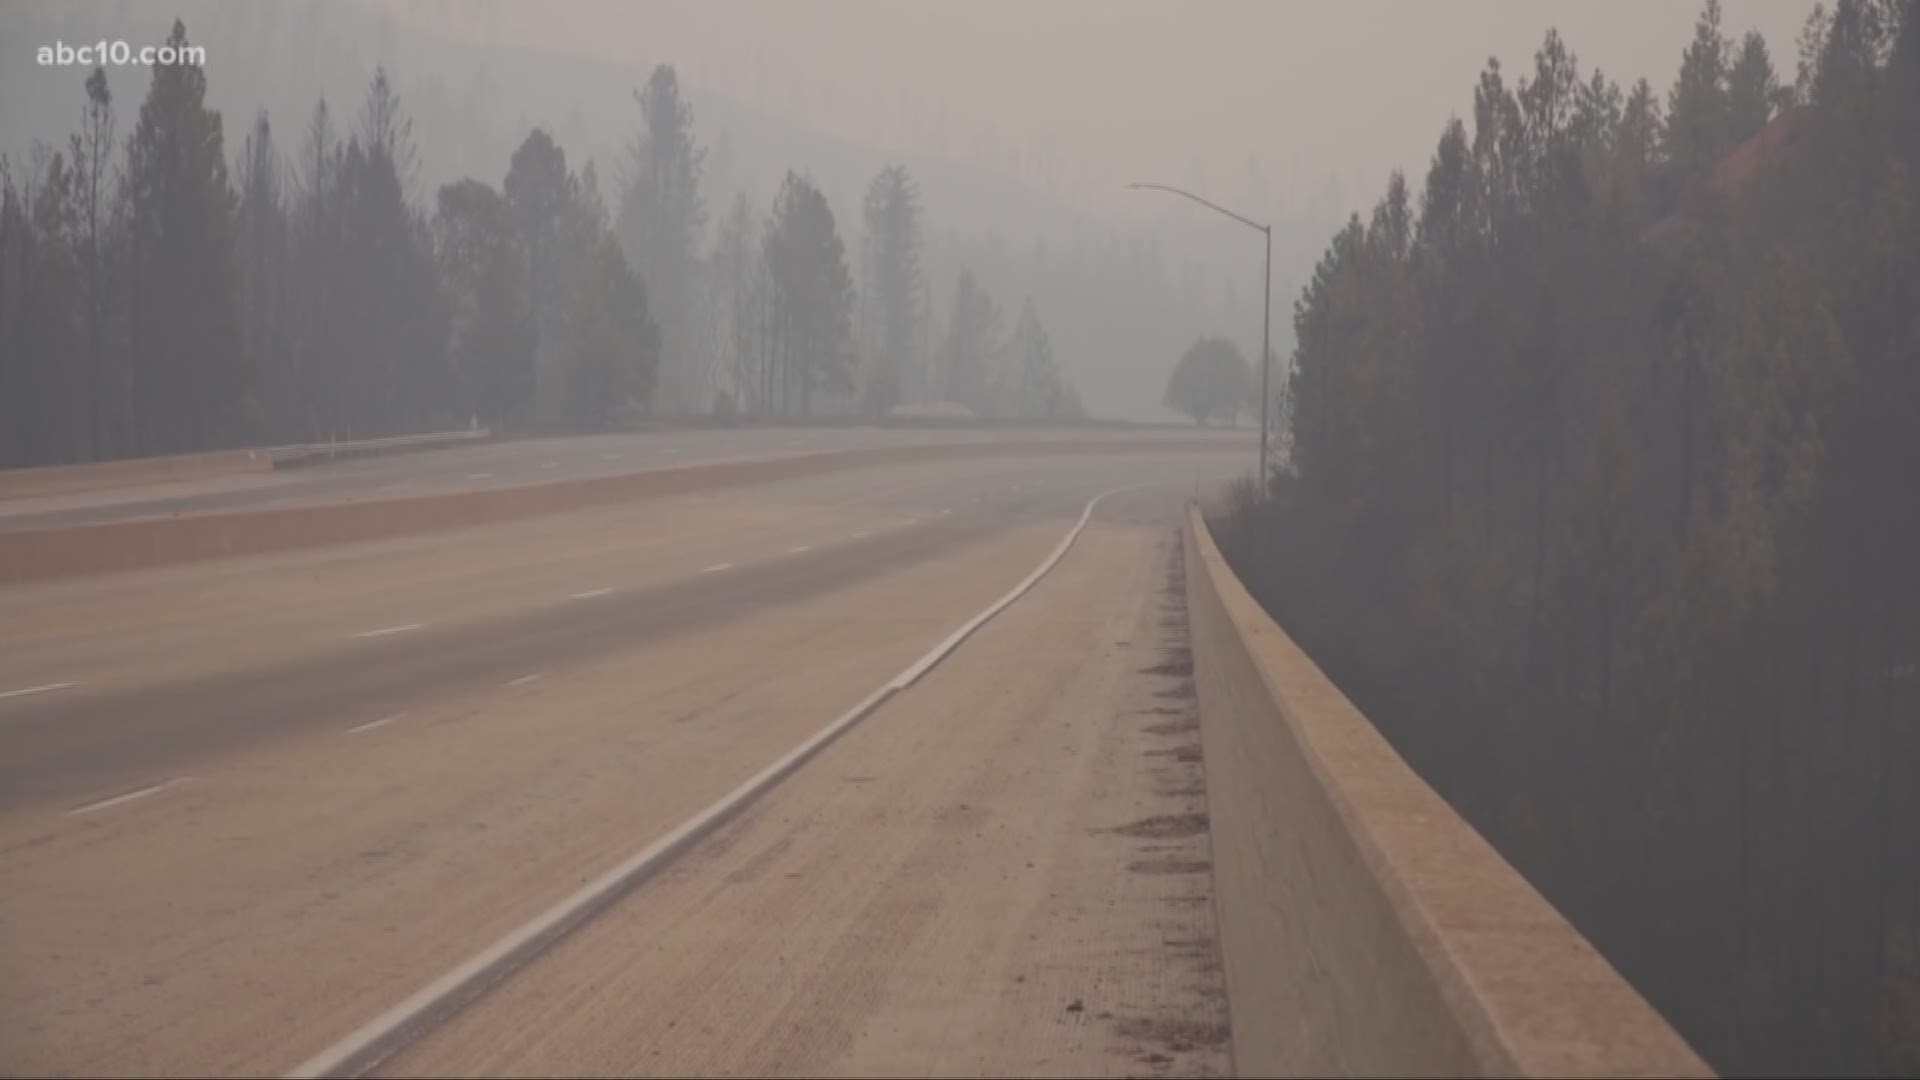 This morning, I-5 is still closed as the Delta Fire continues to burn north of Redding.